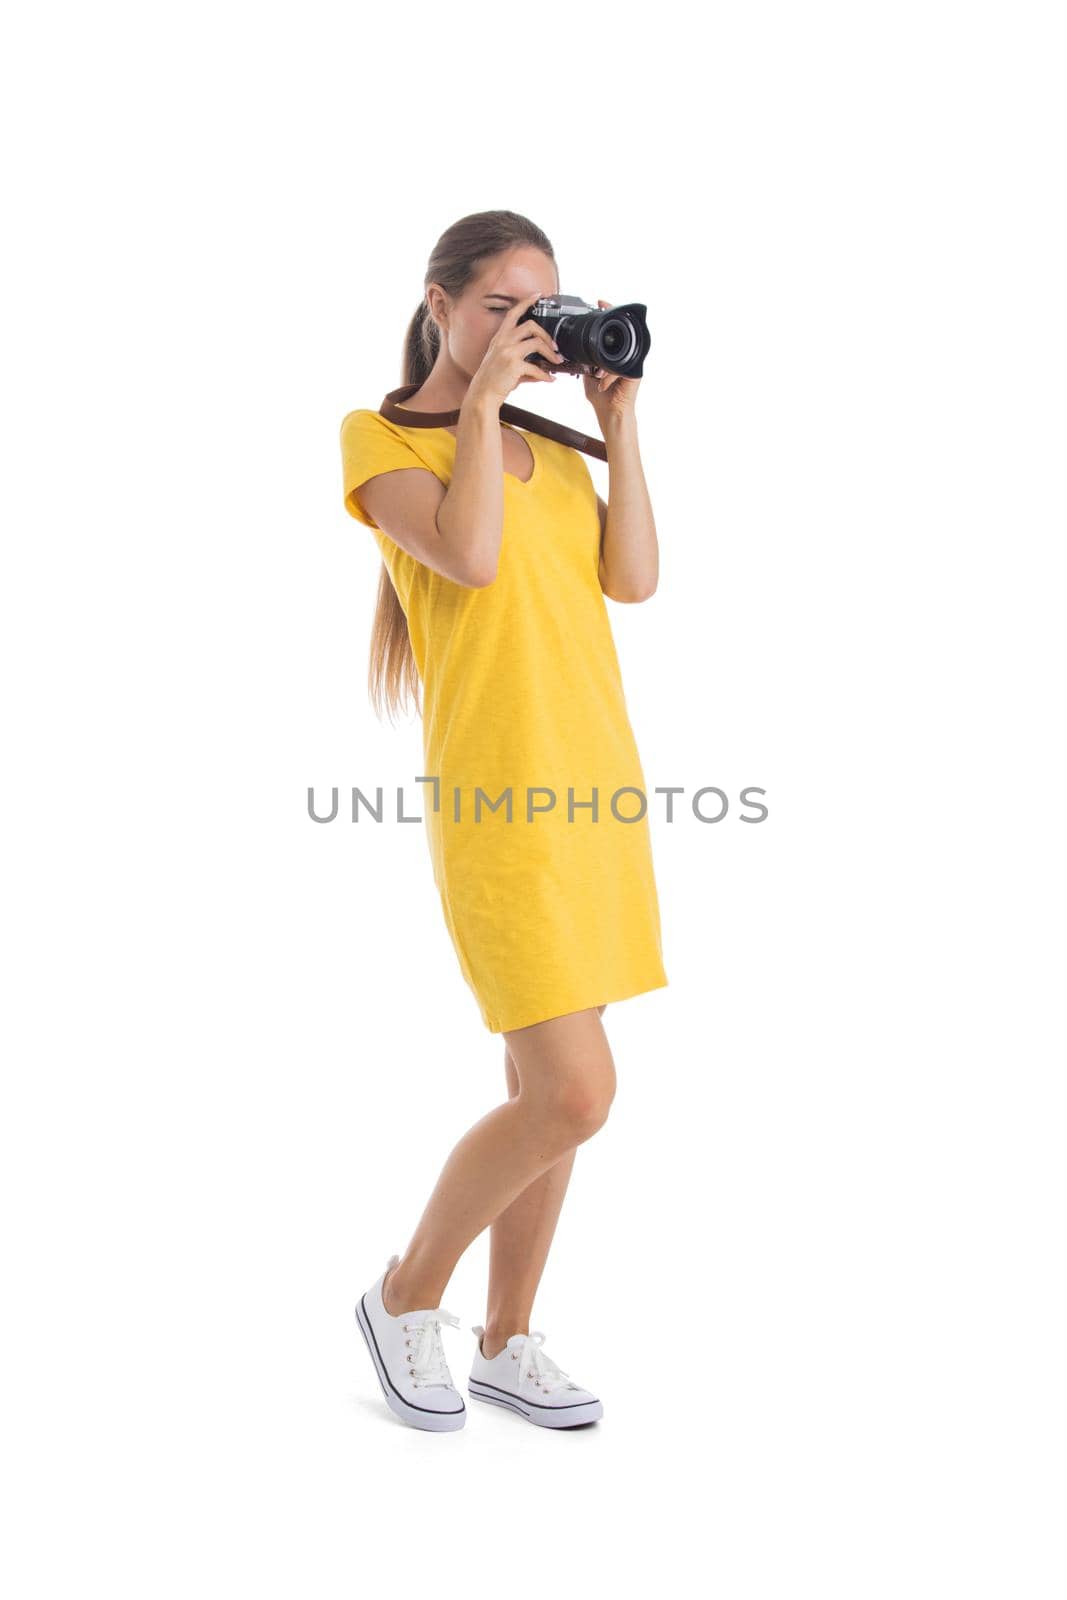 Young caucasian woman in yellow dress takes images with photo camera. Full length portrait. Isolated on the white background.